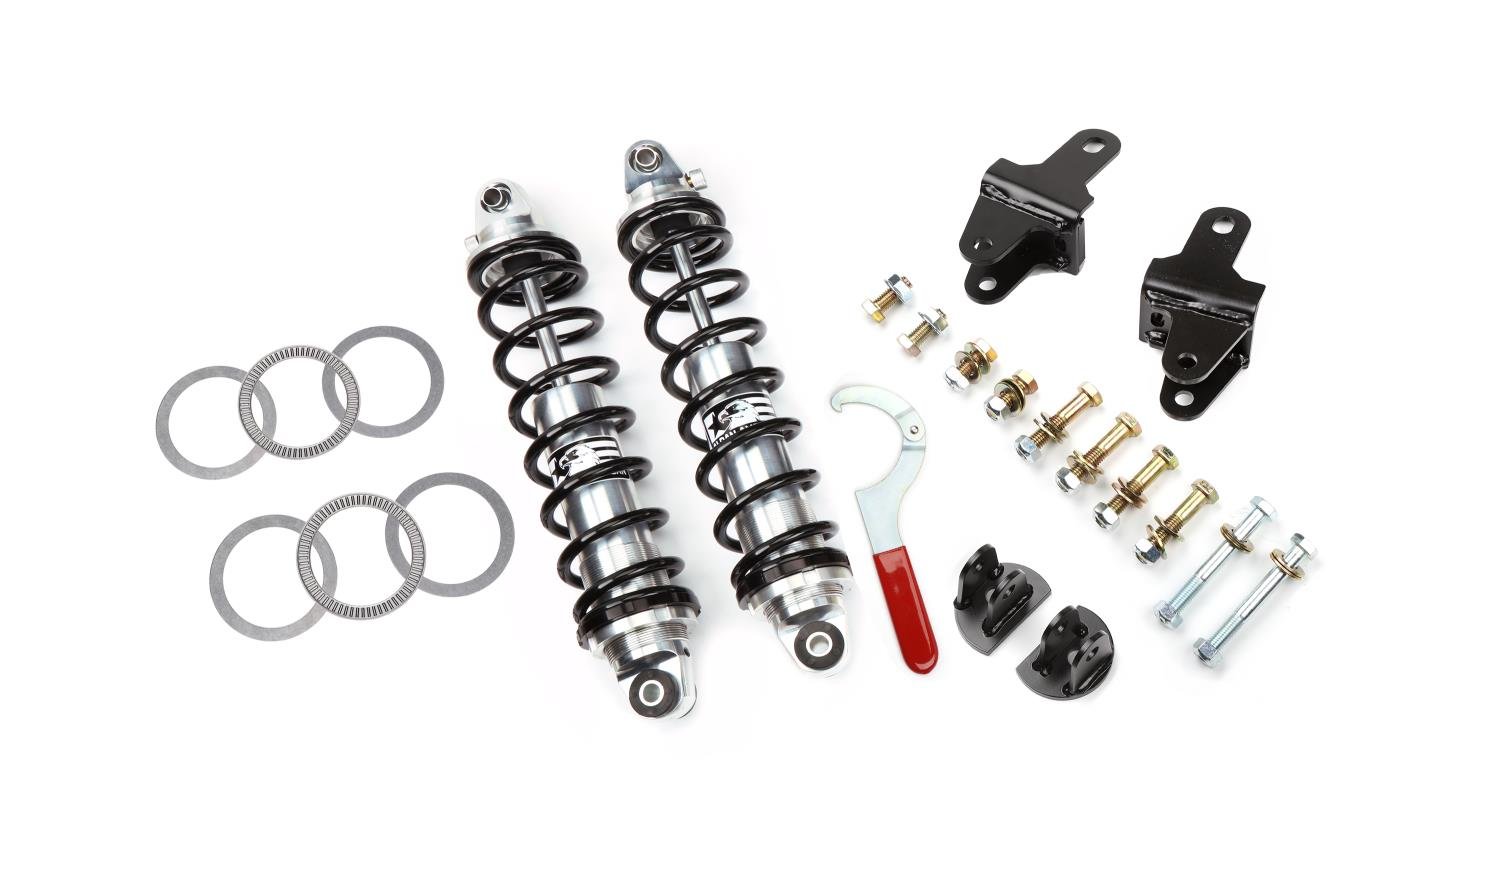 Road Comp Series Rear Coilover Conversion Kit 1979-2004 Ford Mustang, Single-Adjustable [120 lbs./in. Springs]